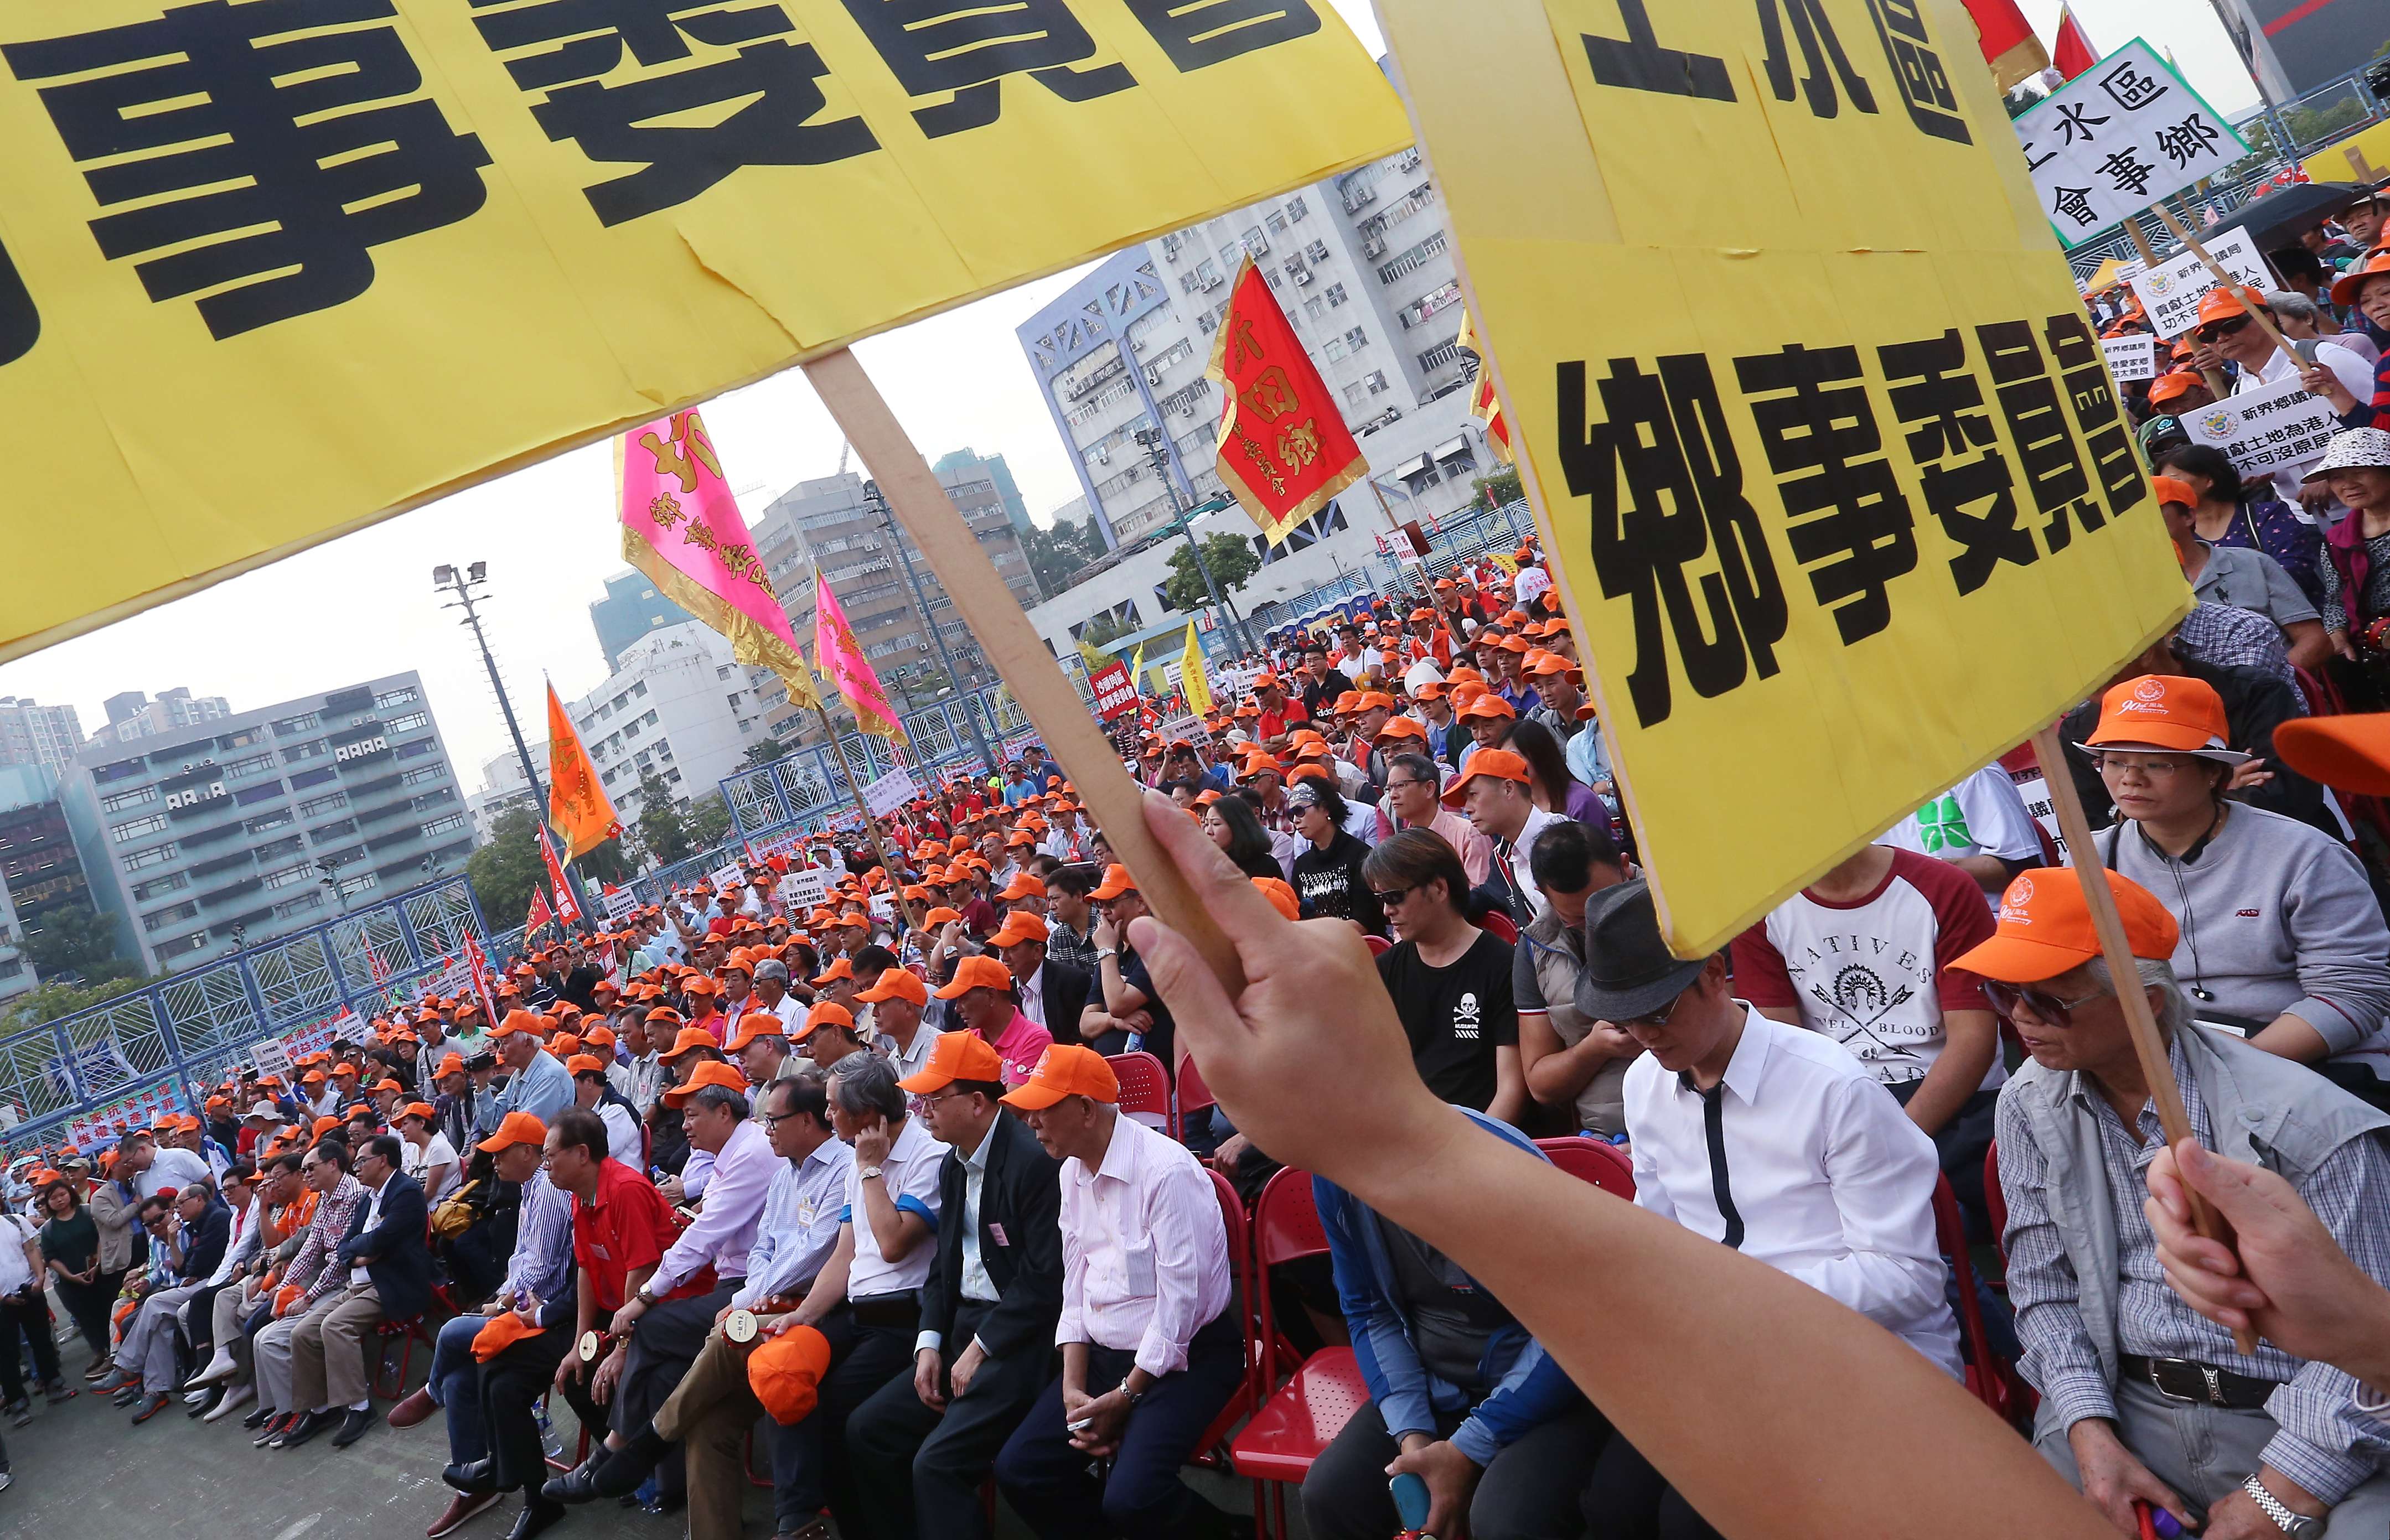 A rally organised by the Heung Yee Kuk took place in Yuen Long on Sunday. Photo: K.Y. Cheng